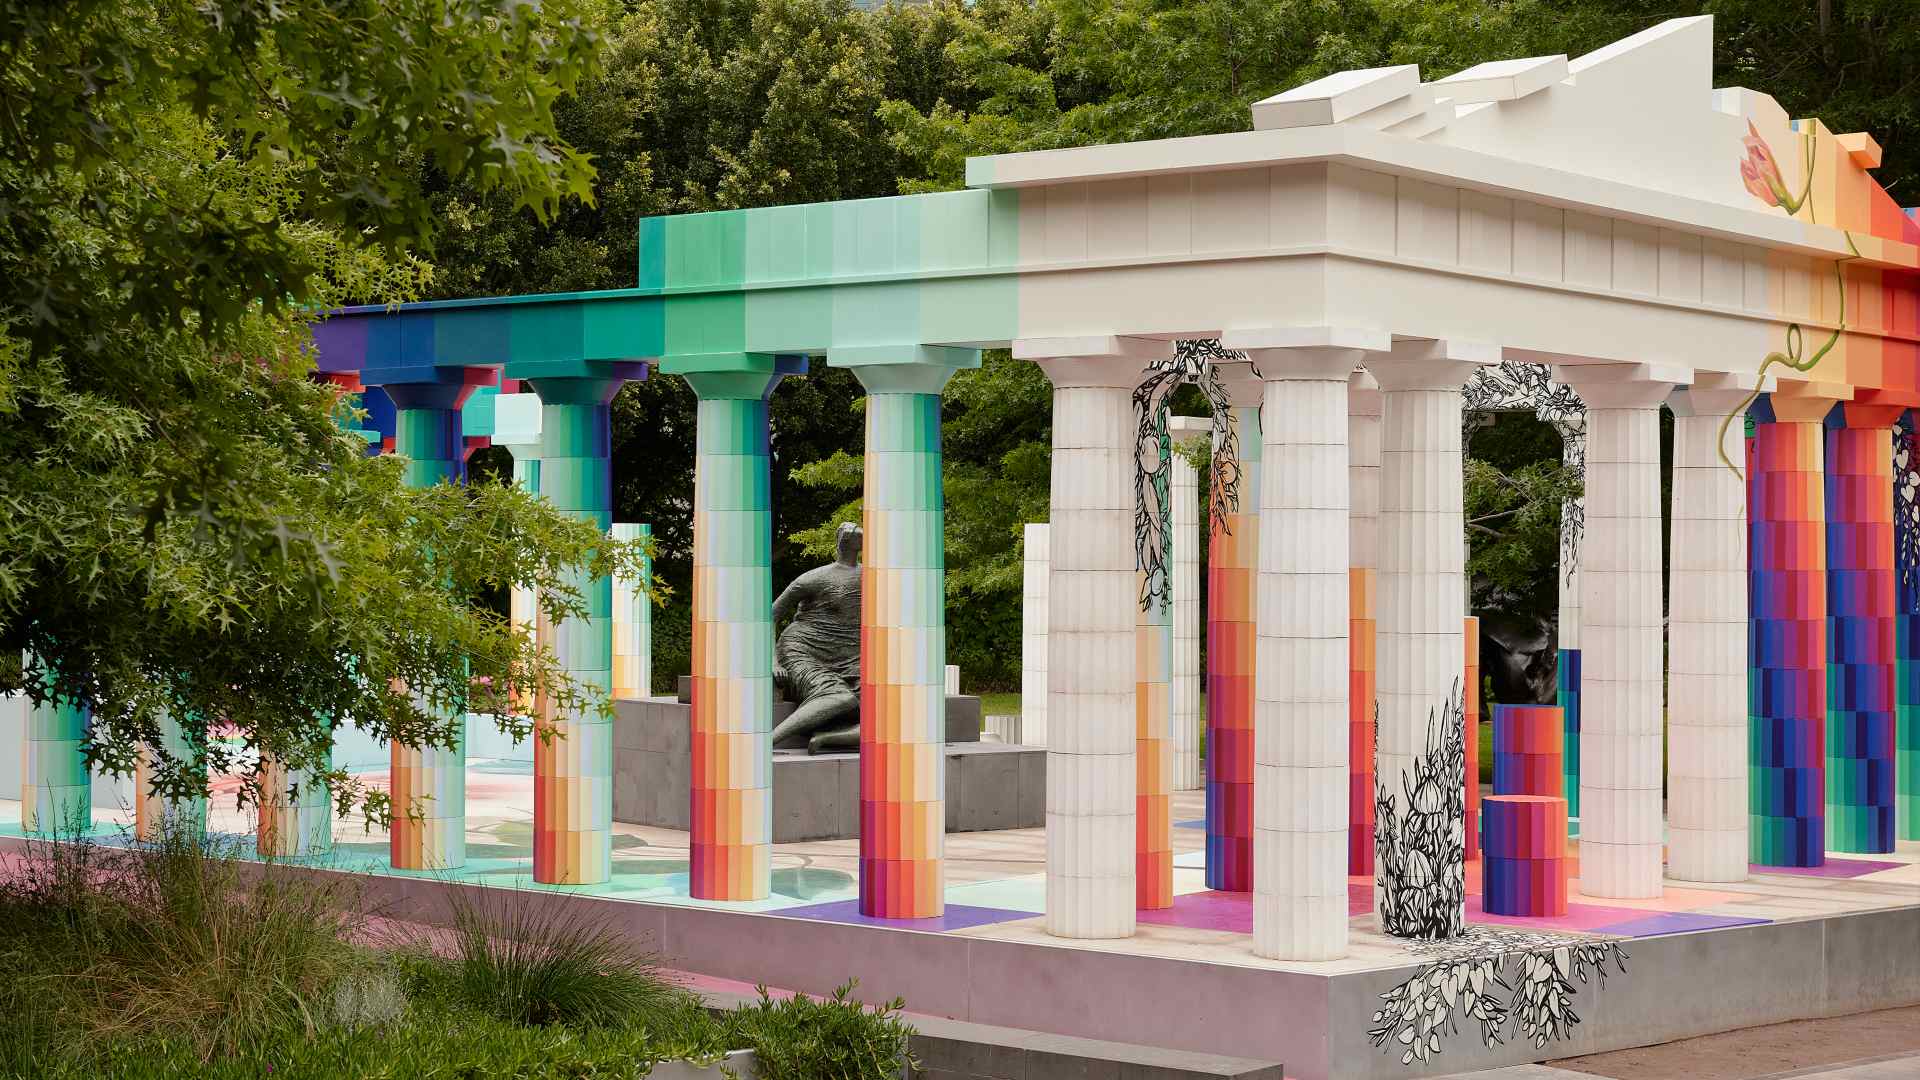 'Temple of Boom' Is the Colourful Mini Parthenon Replica That's Landed in the NGV Grounds